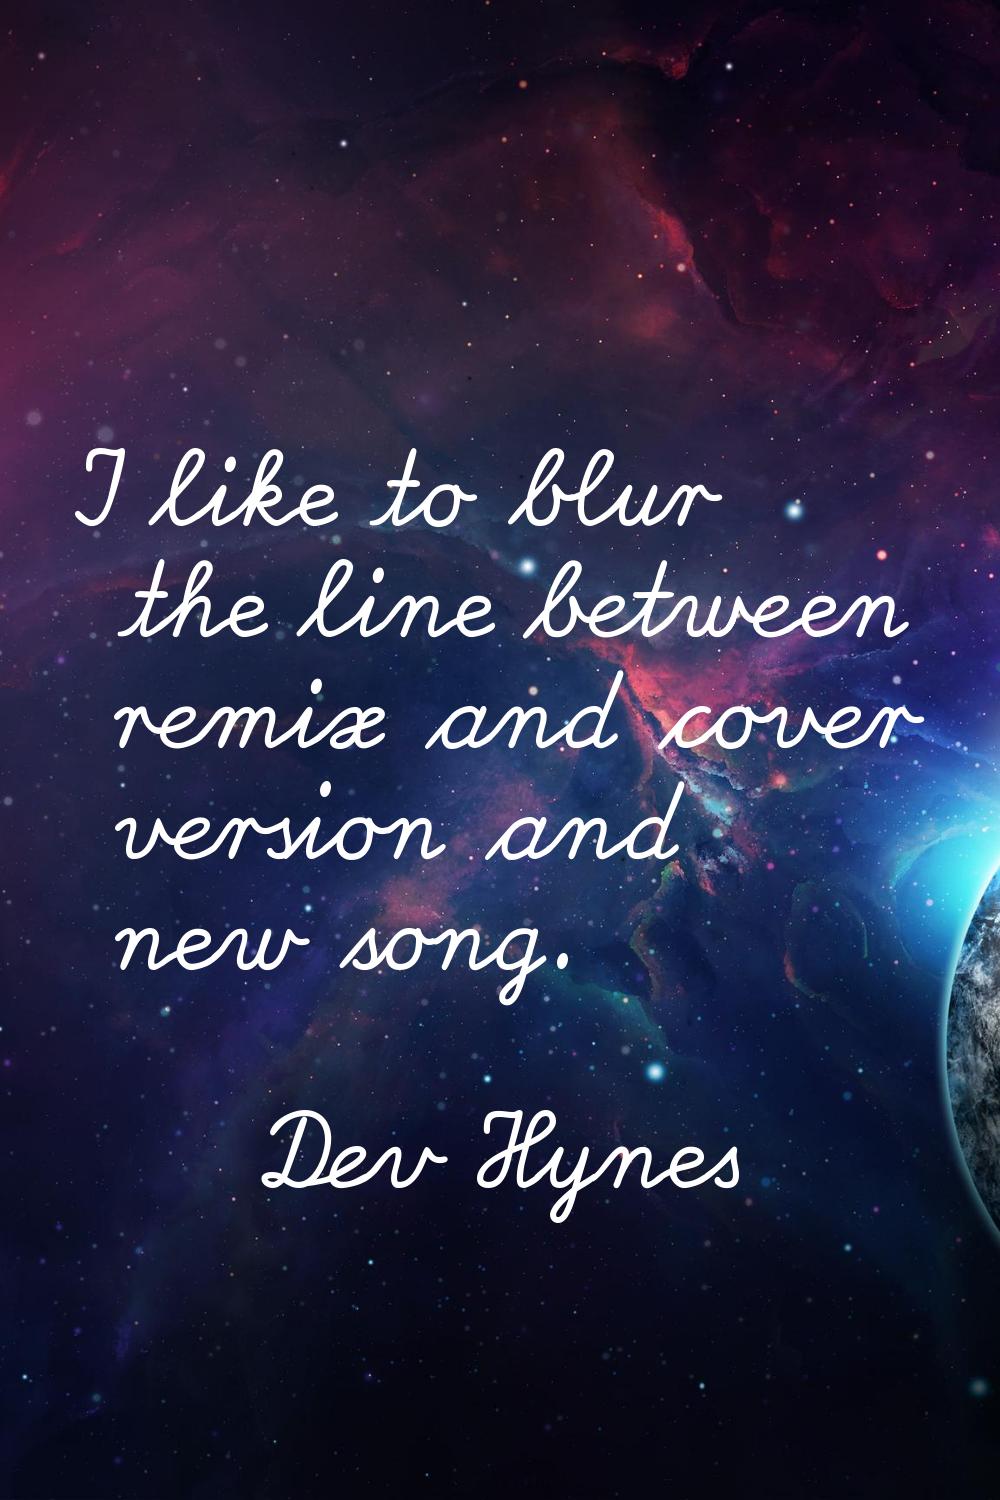 I like to blur the line between remix and cover version and new song.